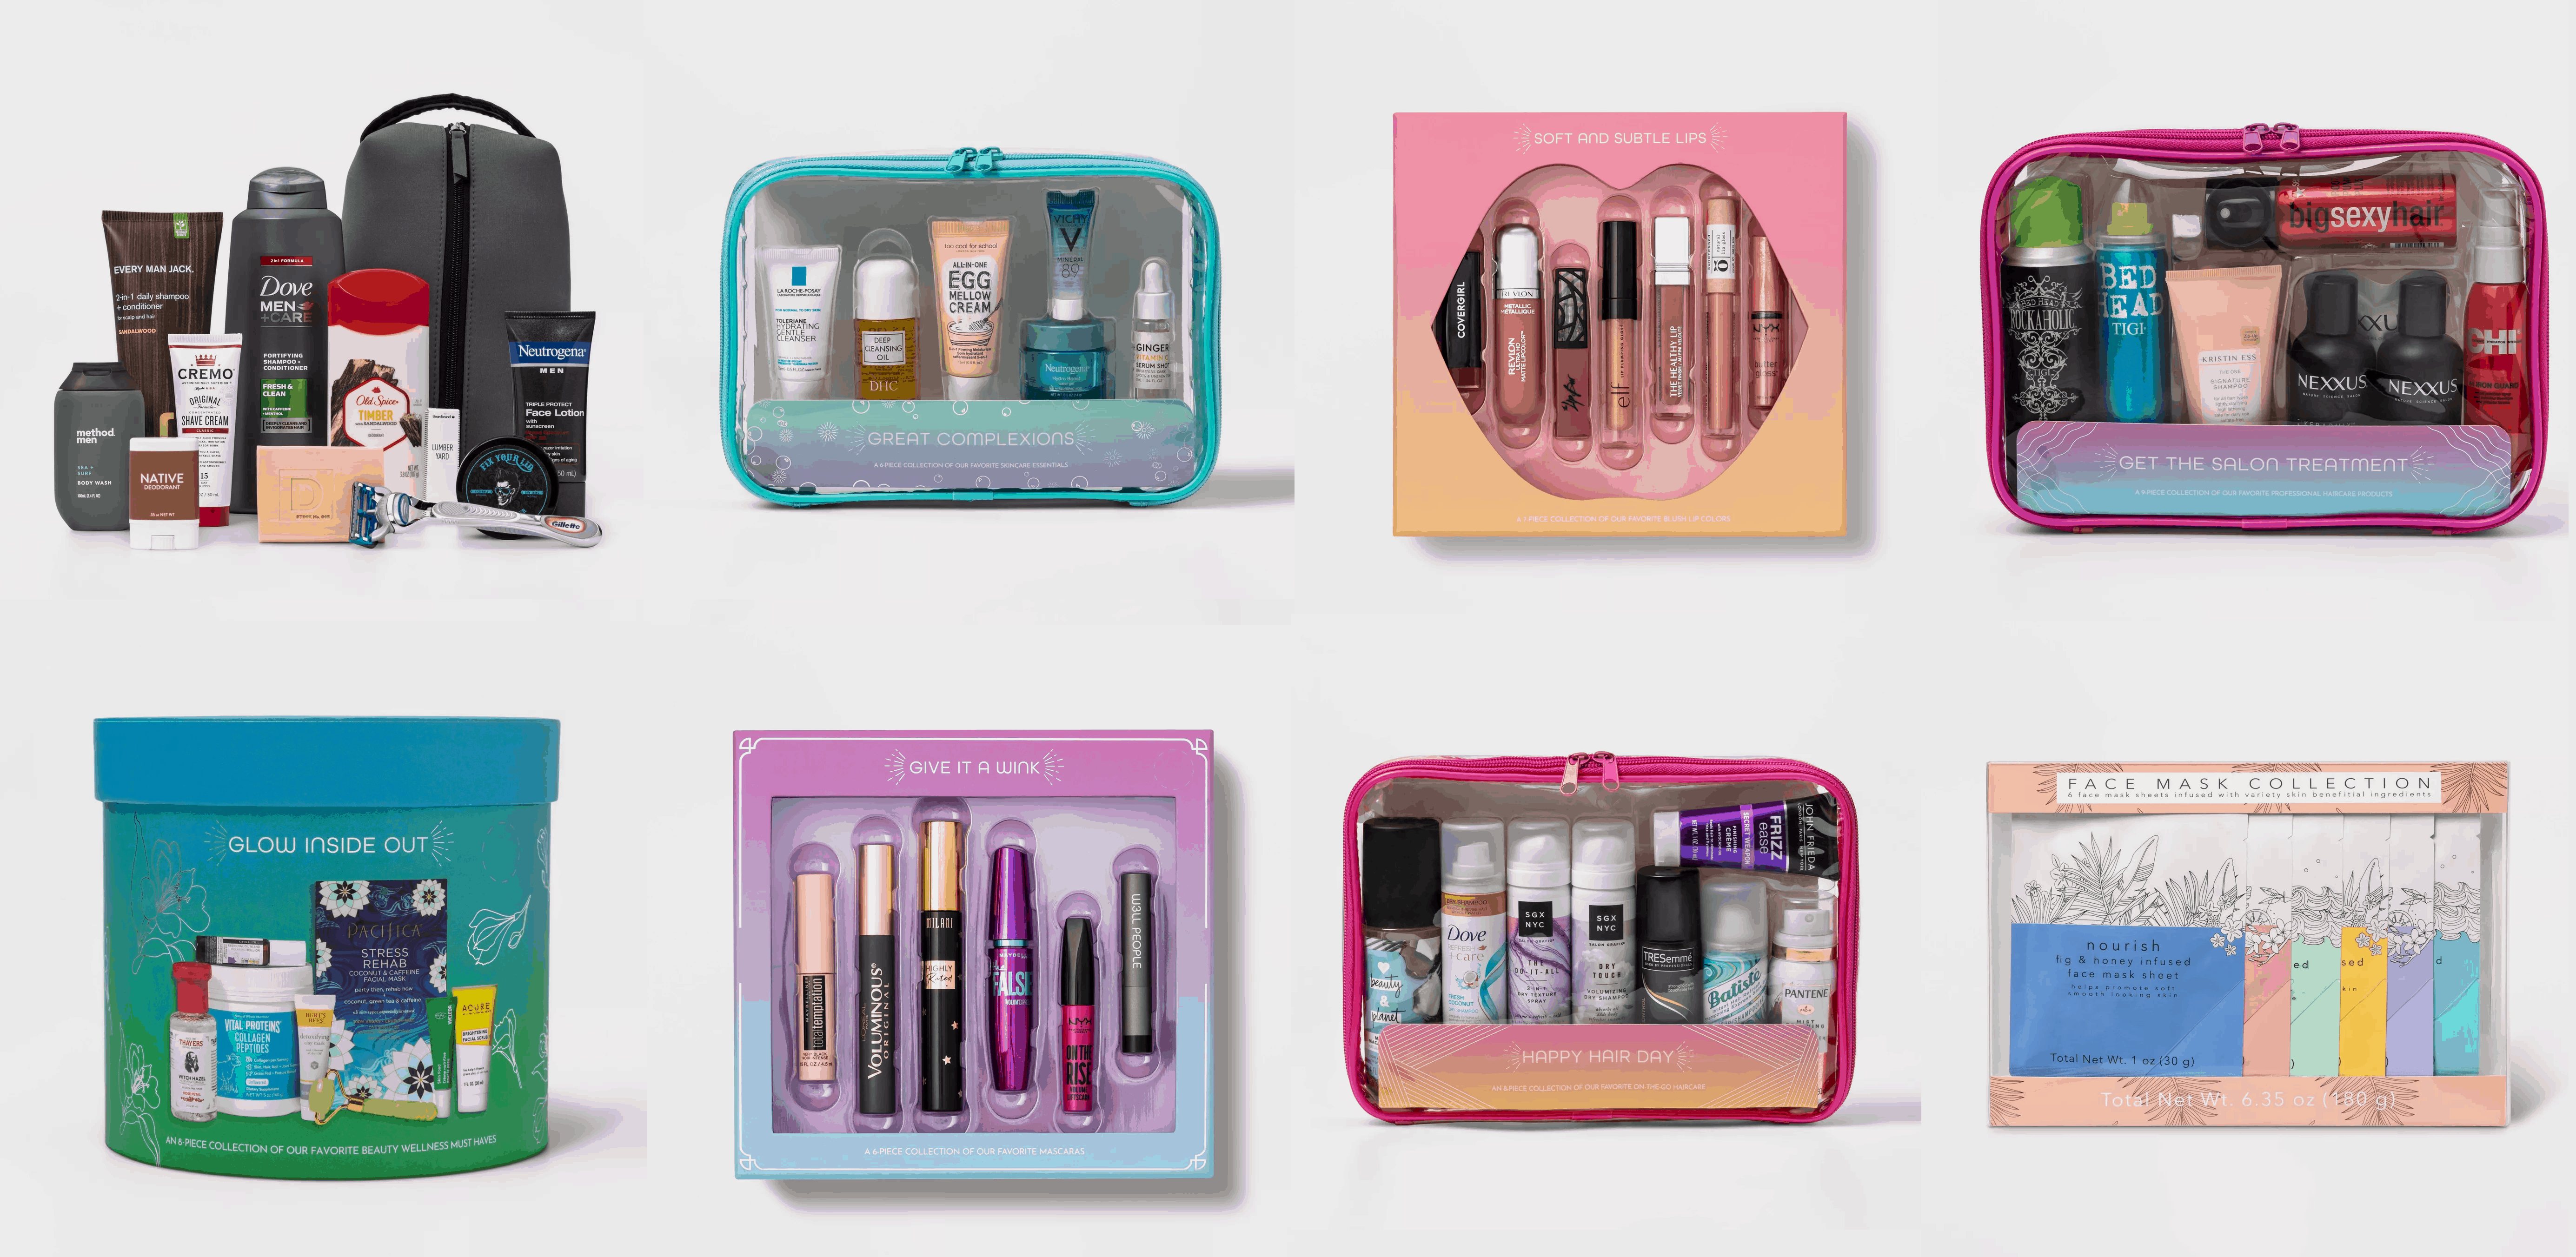 Target Holiday Beauty Kits Available Now! - hello subscription